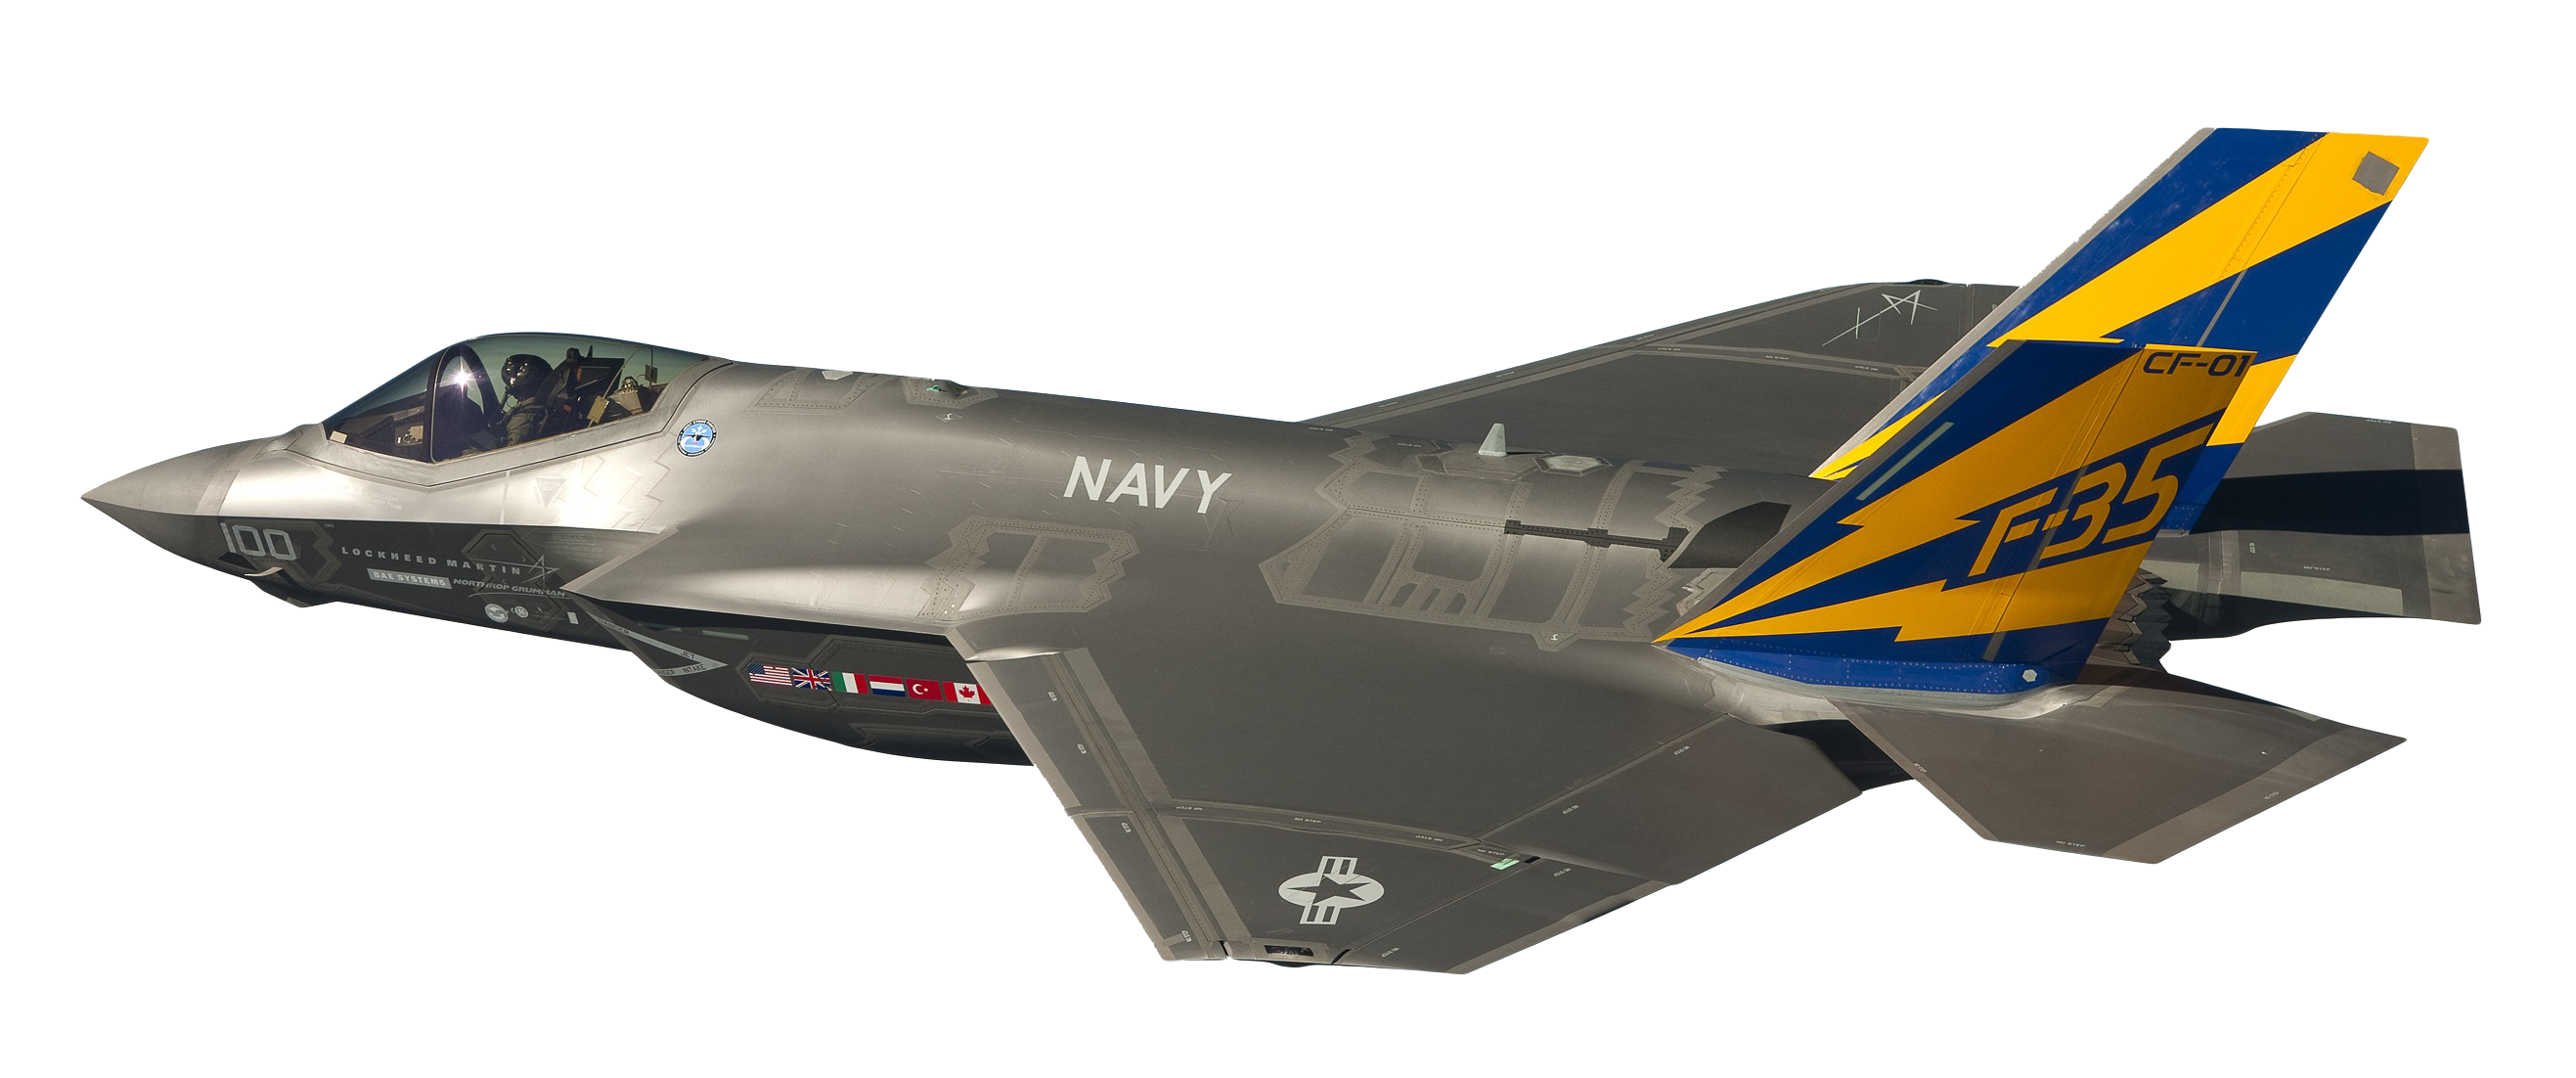 Download Image Pluspng Pluspng.com   Png Jet Plane - Navy Airplane, Transparent background PNG HD thumbnail